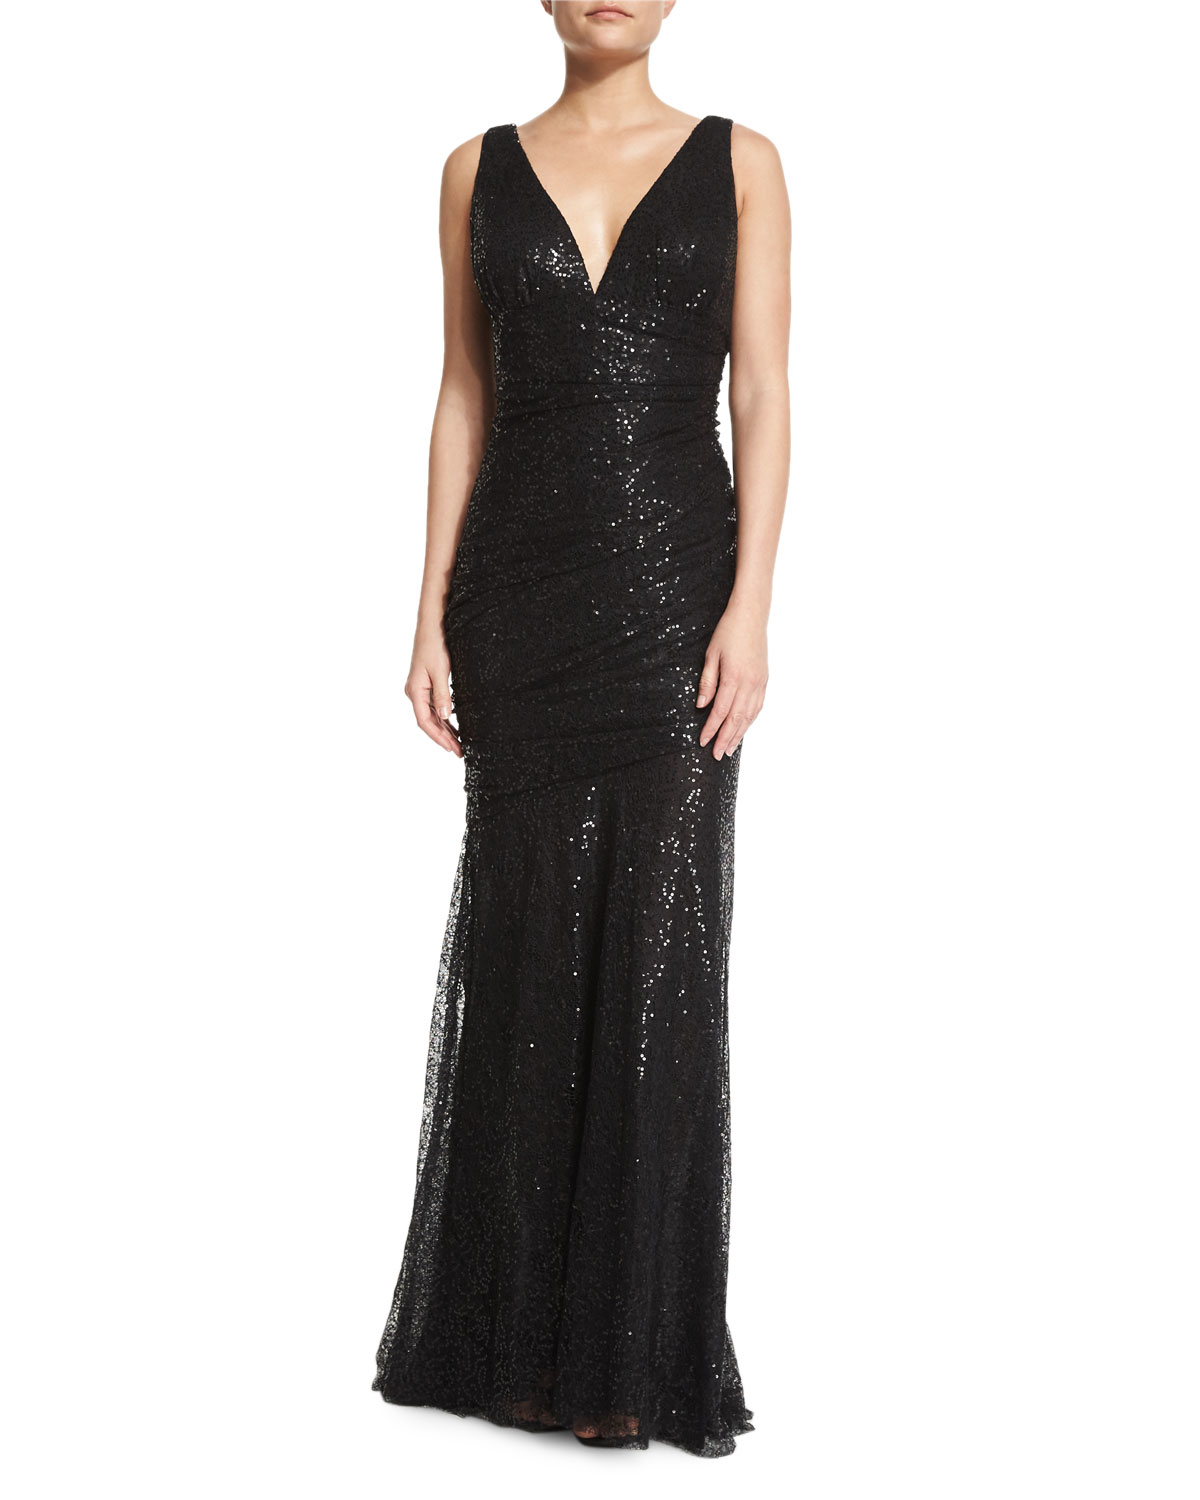 Lyst - Carmen marc valvo Sleeveless Embellished Ruched Gown in Black